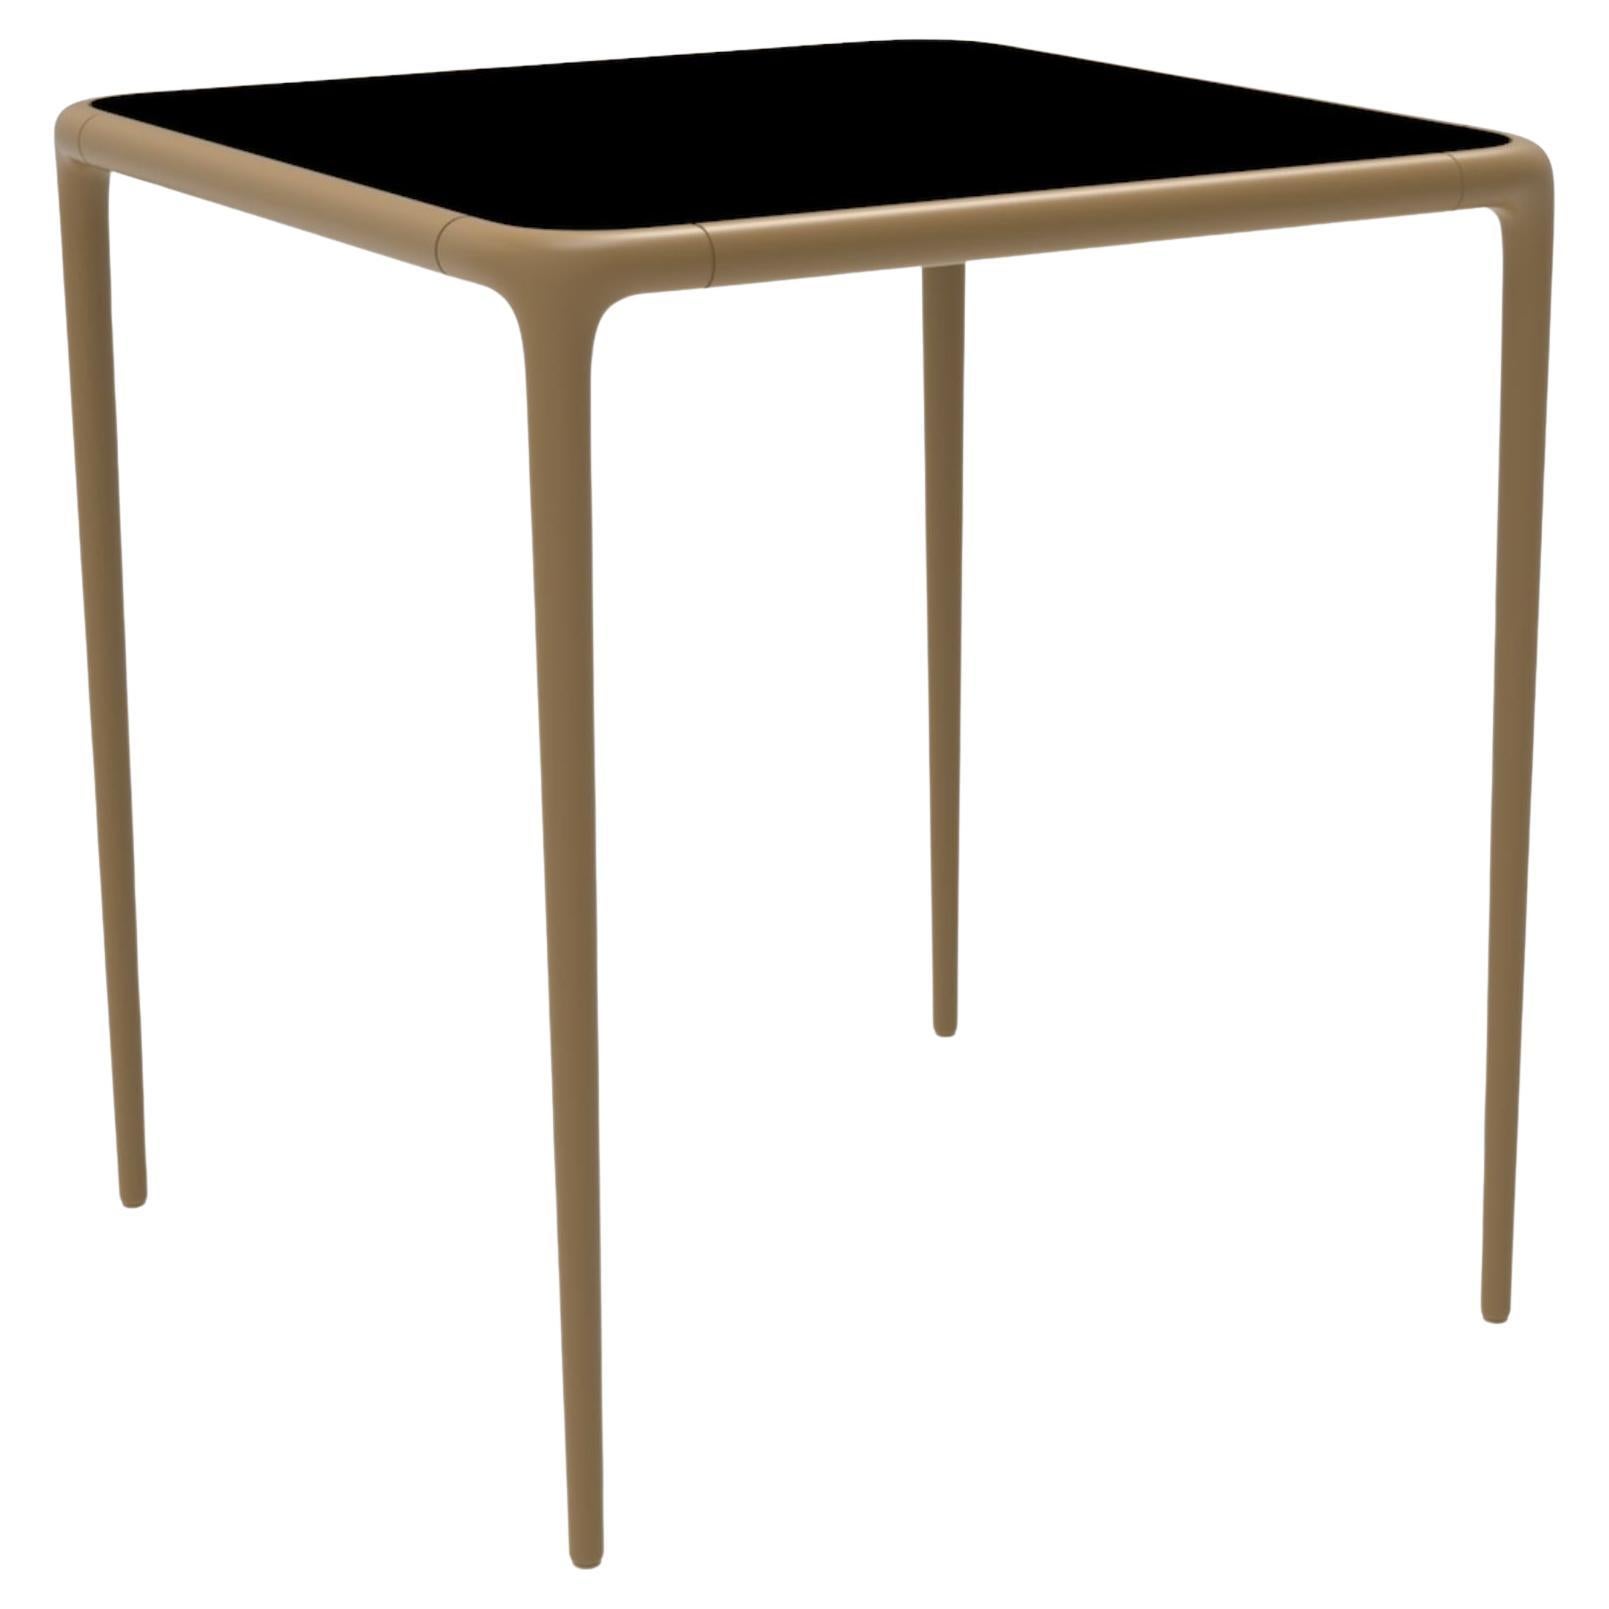 Xaloc Gold Glass Top Table 70 by Mowee